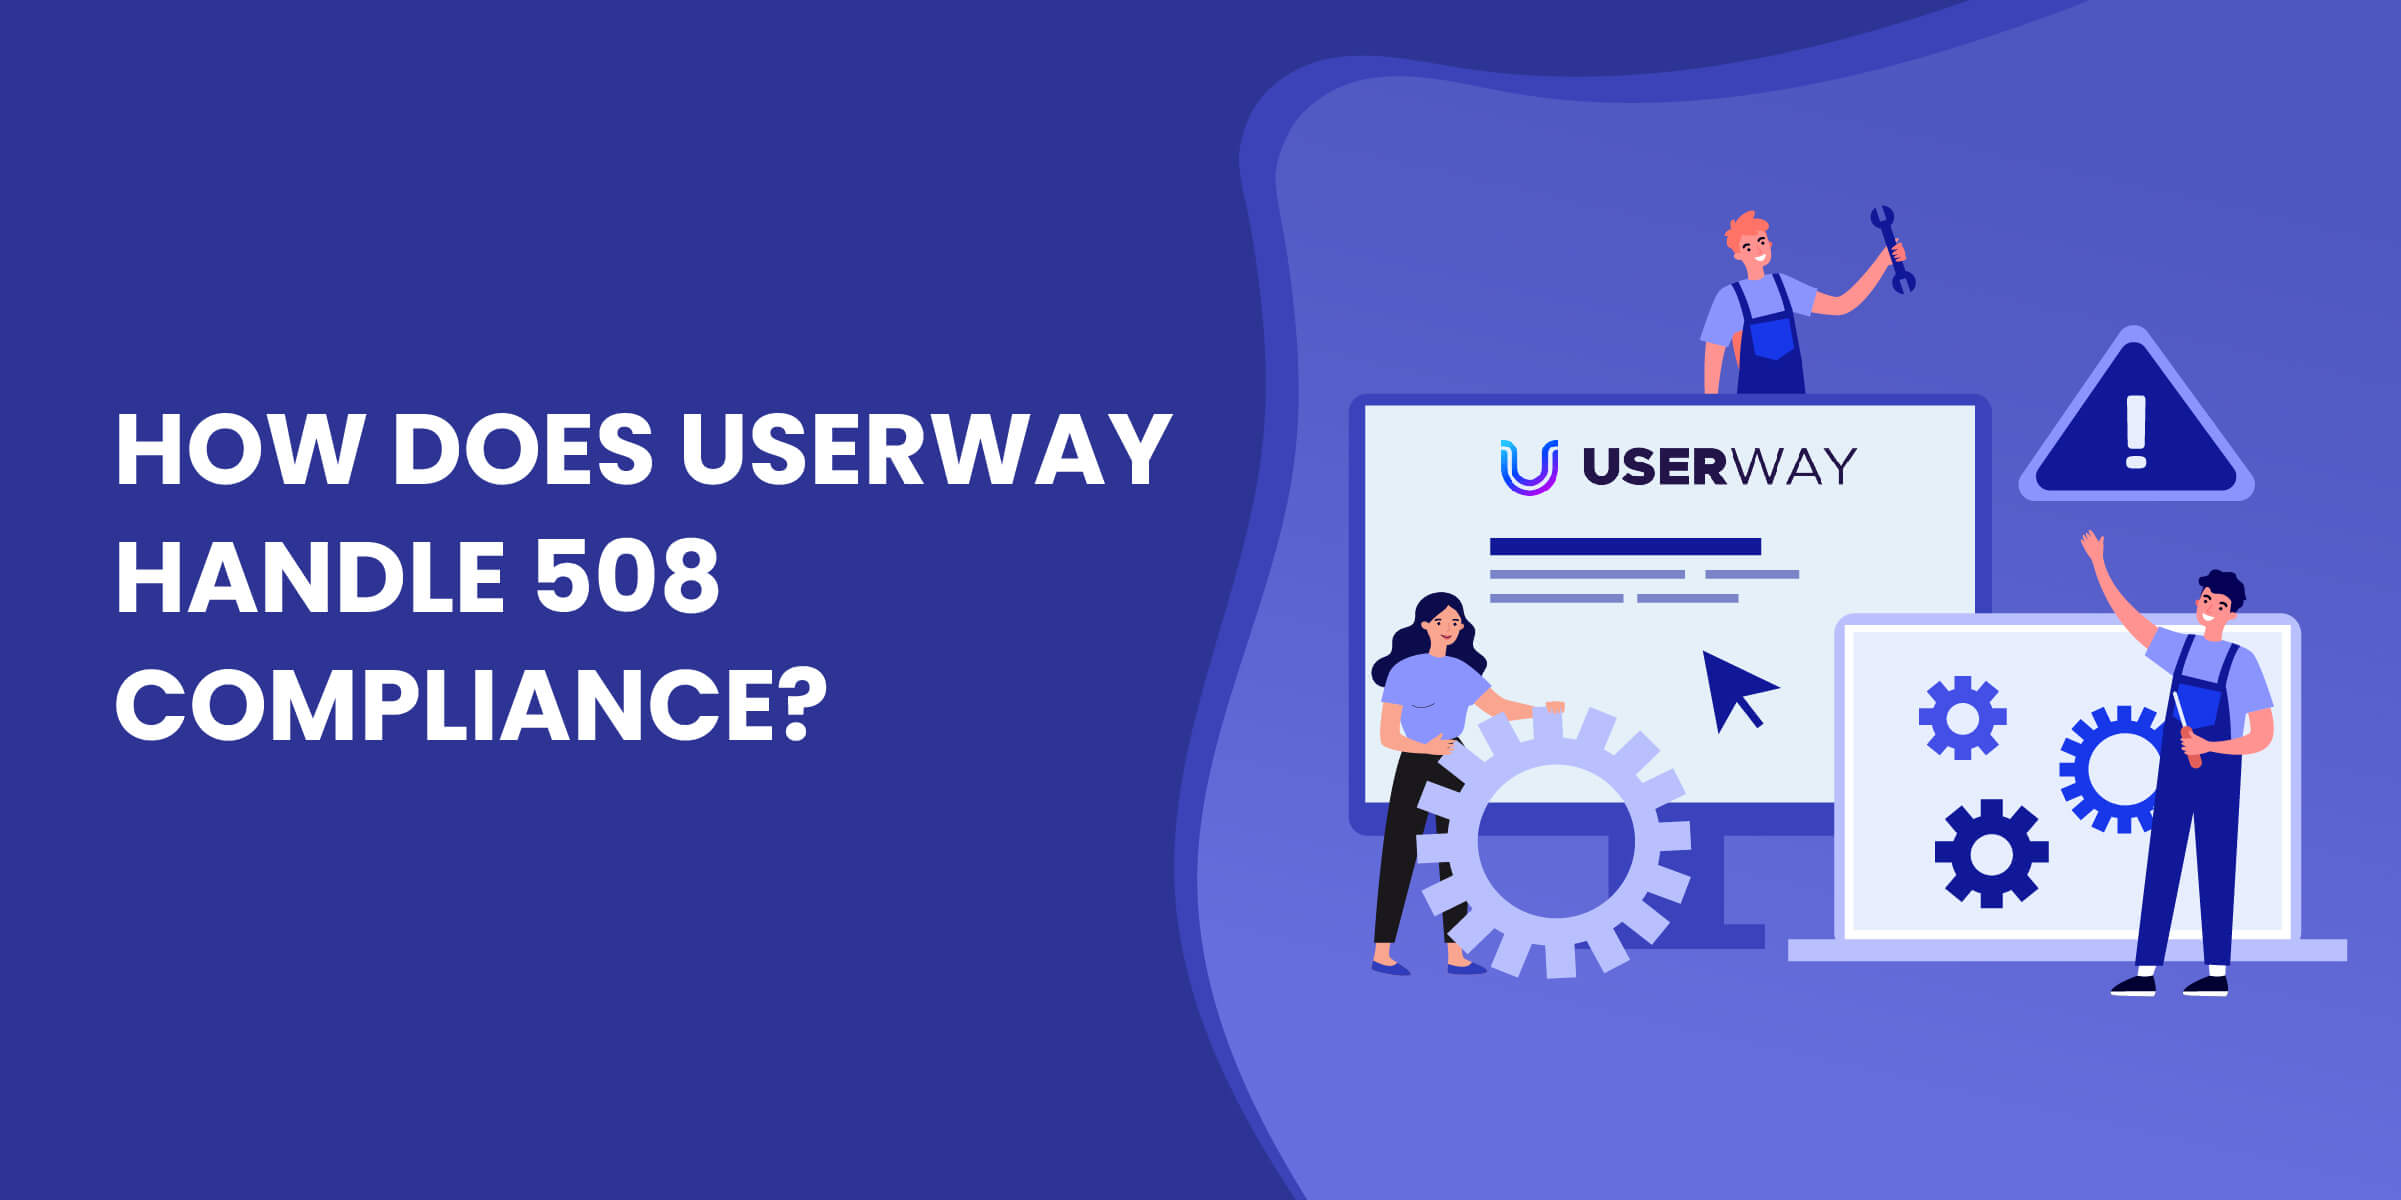 How Does Userway Handle 508